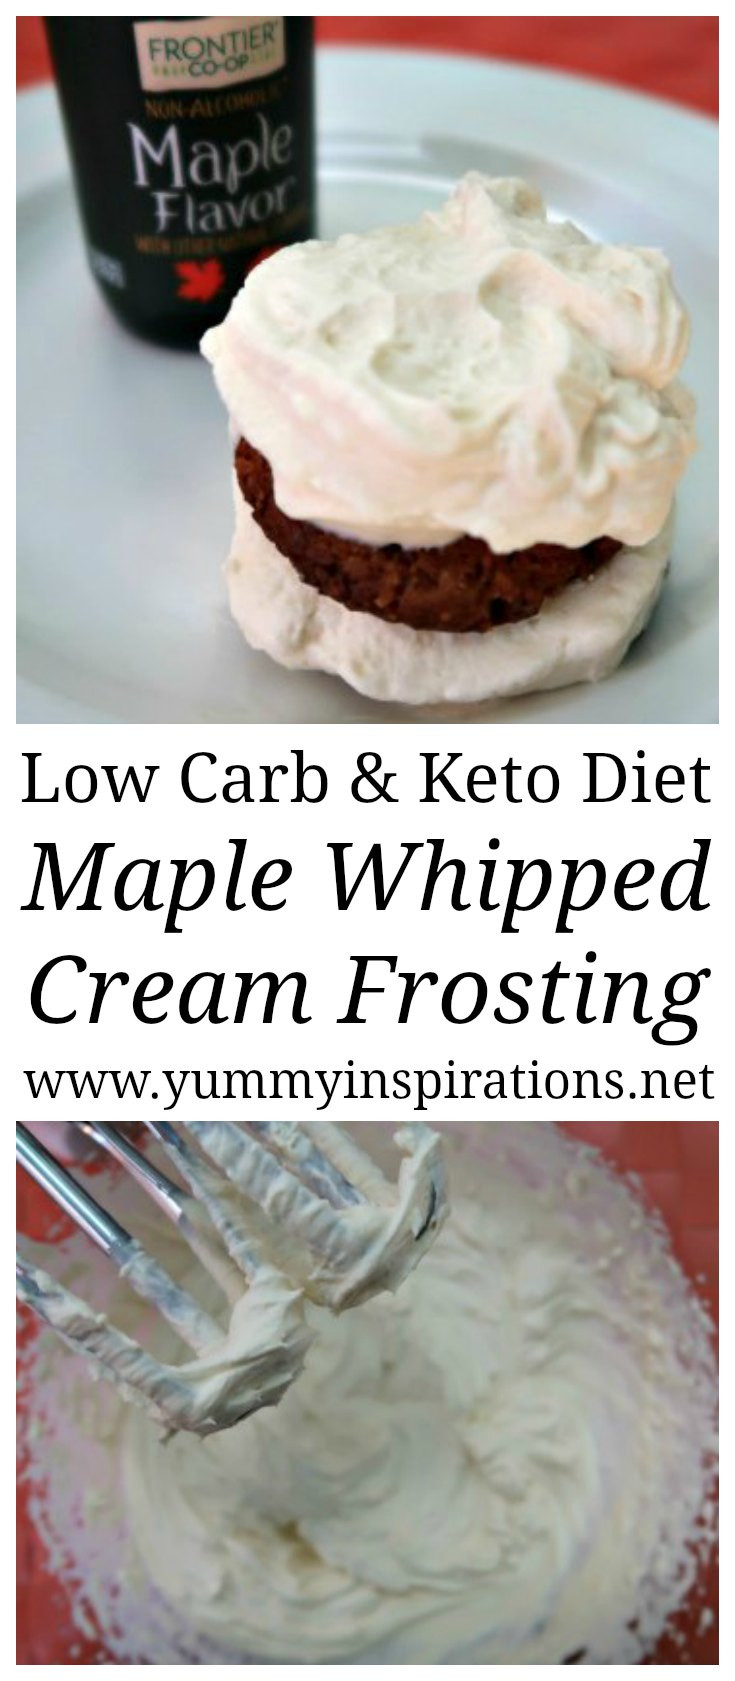 Low Carb Keto Desserts
 Keto Maple Whipped Cream Frosting Recipe Easy Low Carb